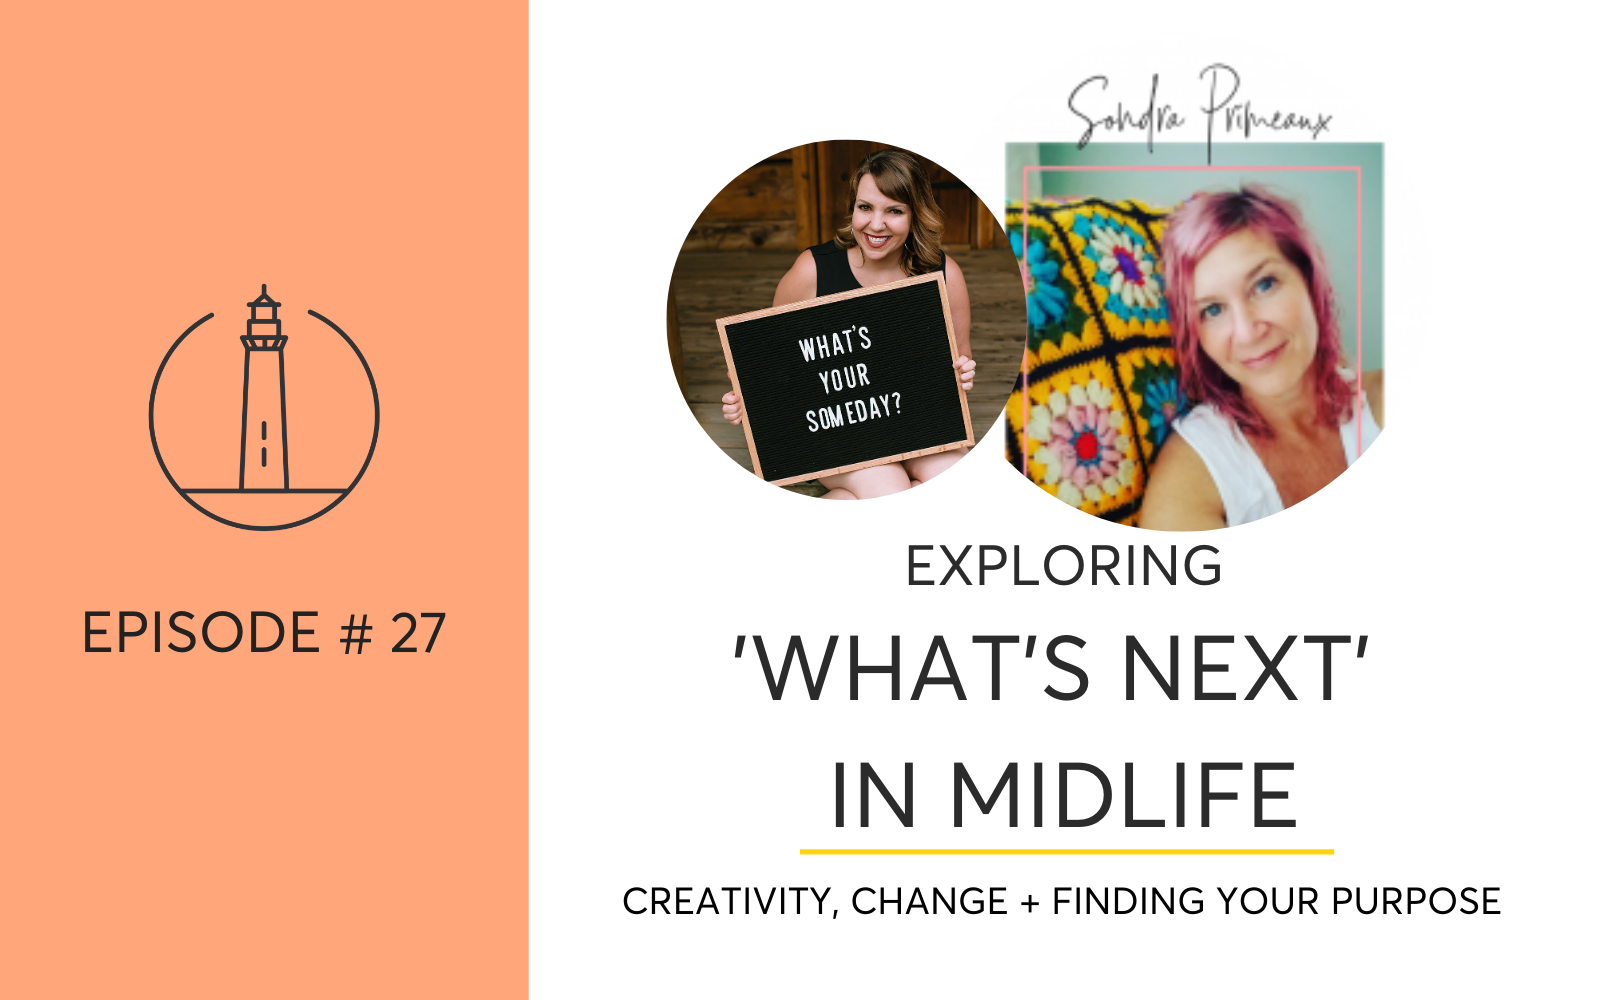 What’s Next in Midlife – Creativity, Change + Finding Your Purpose